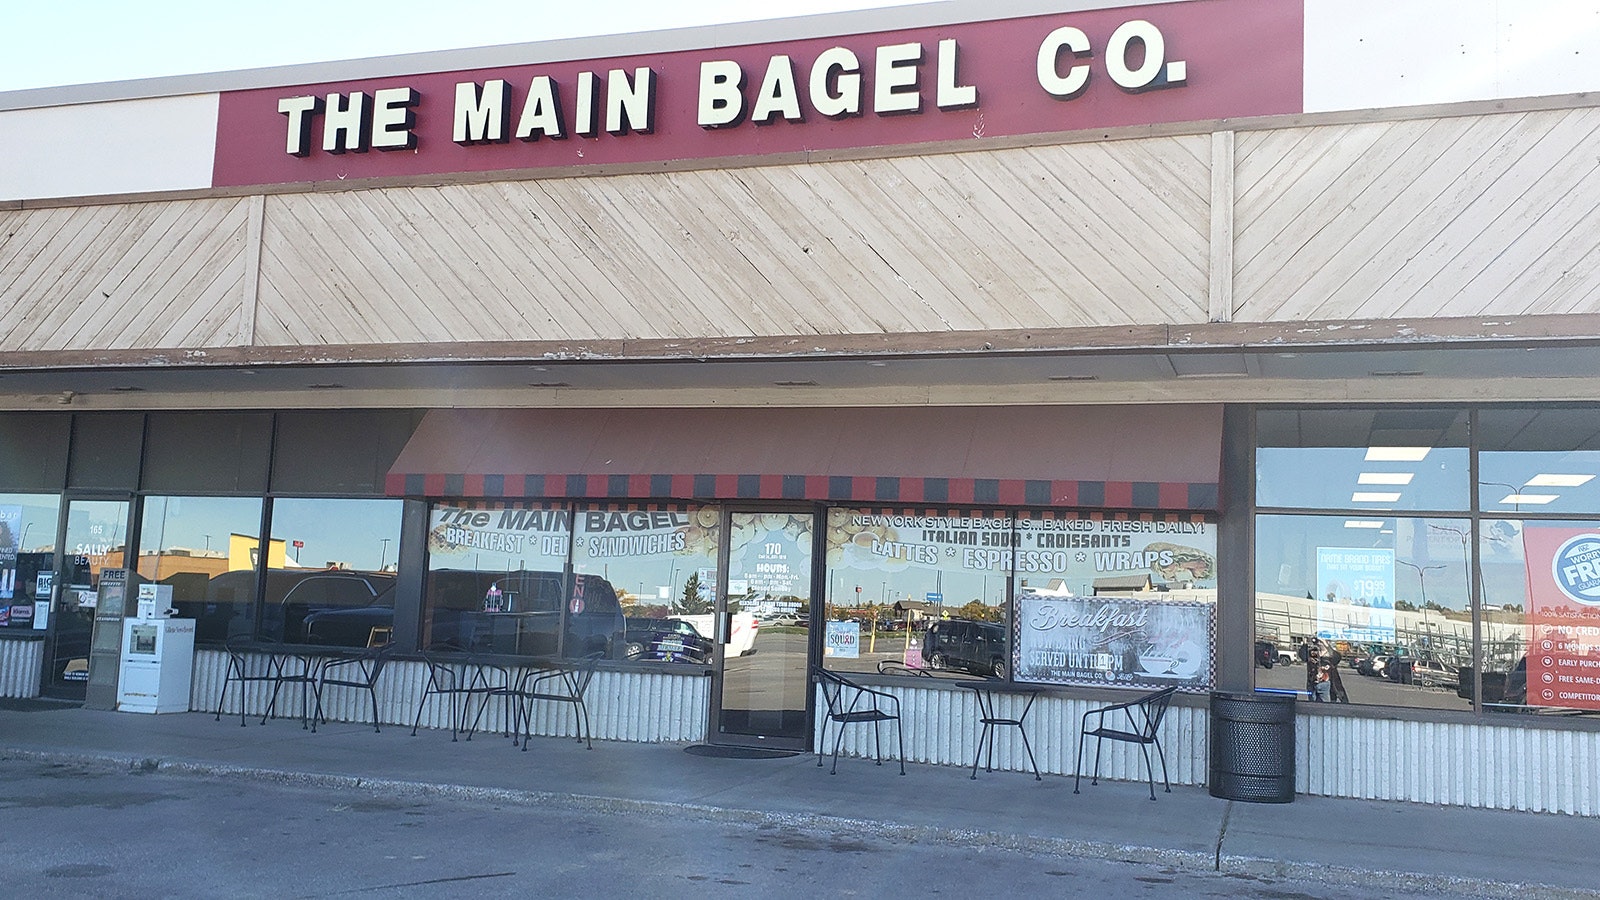 Strange things have reportedly happened at The Main Bagel in Gillette.